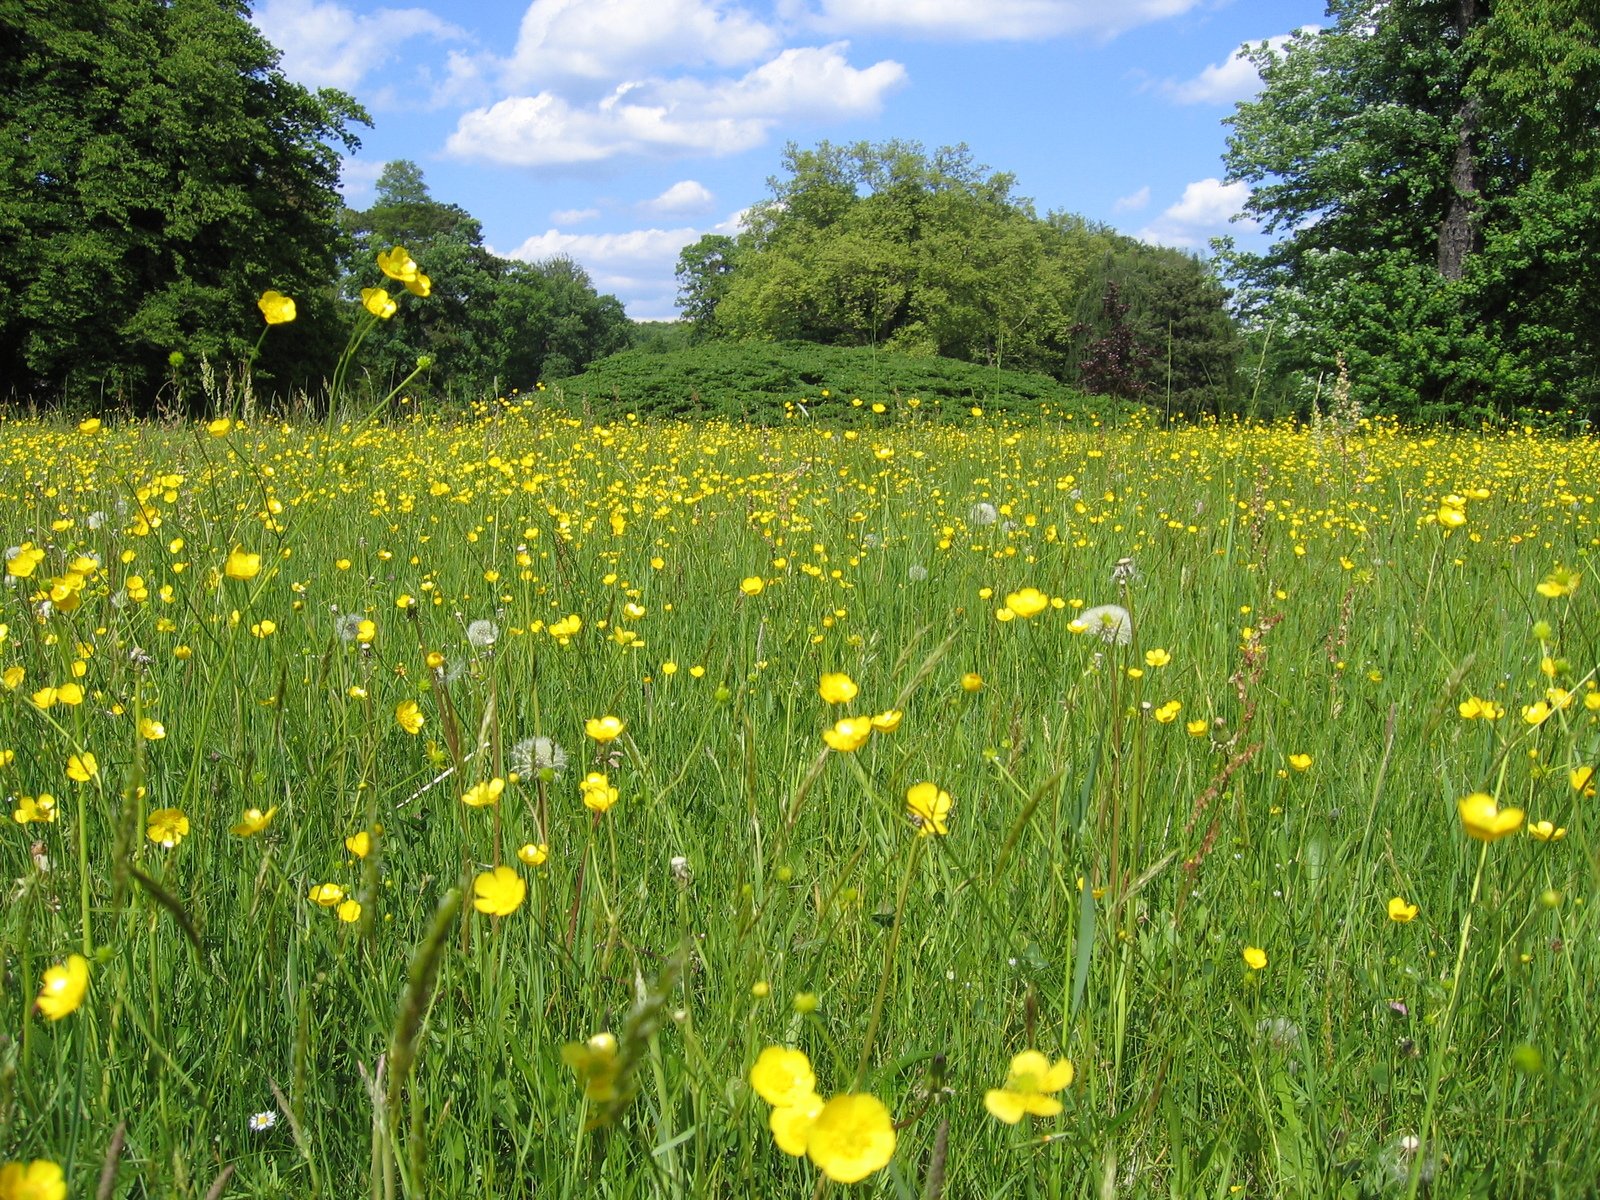 an open field with yellow flowers and trees